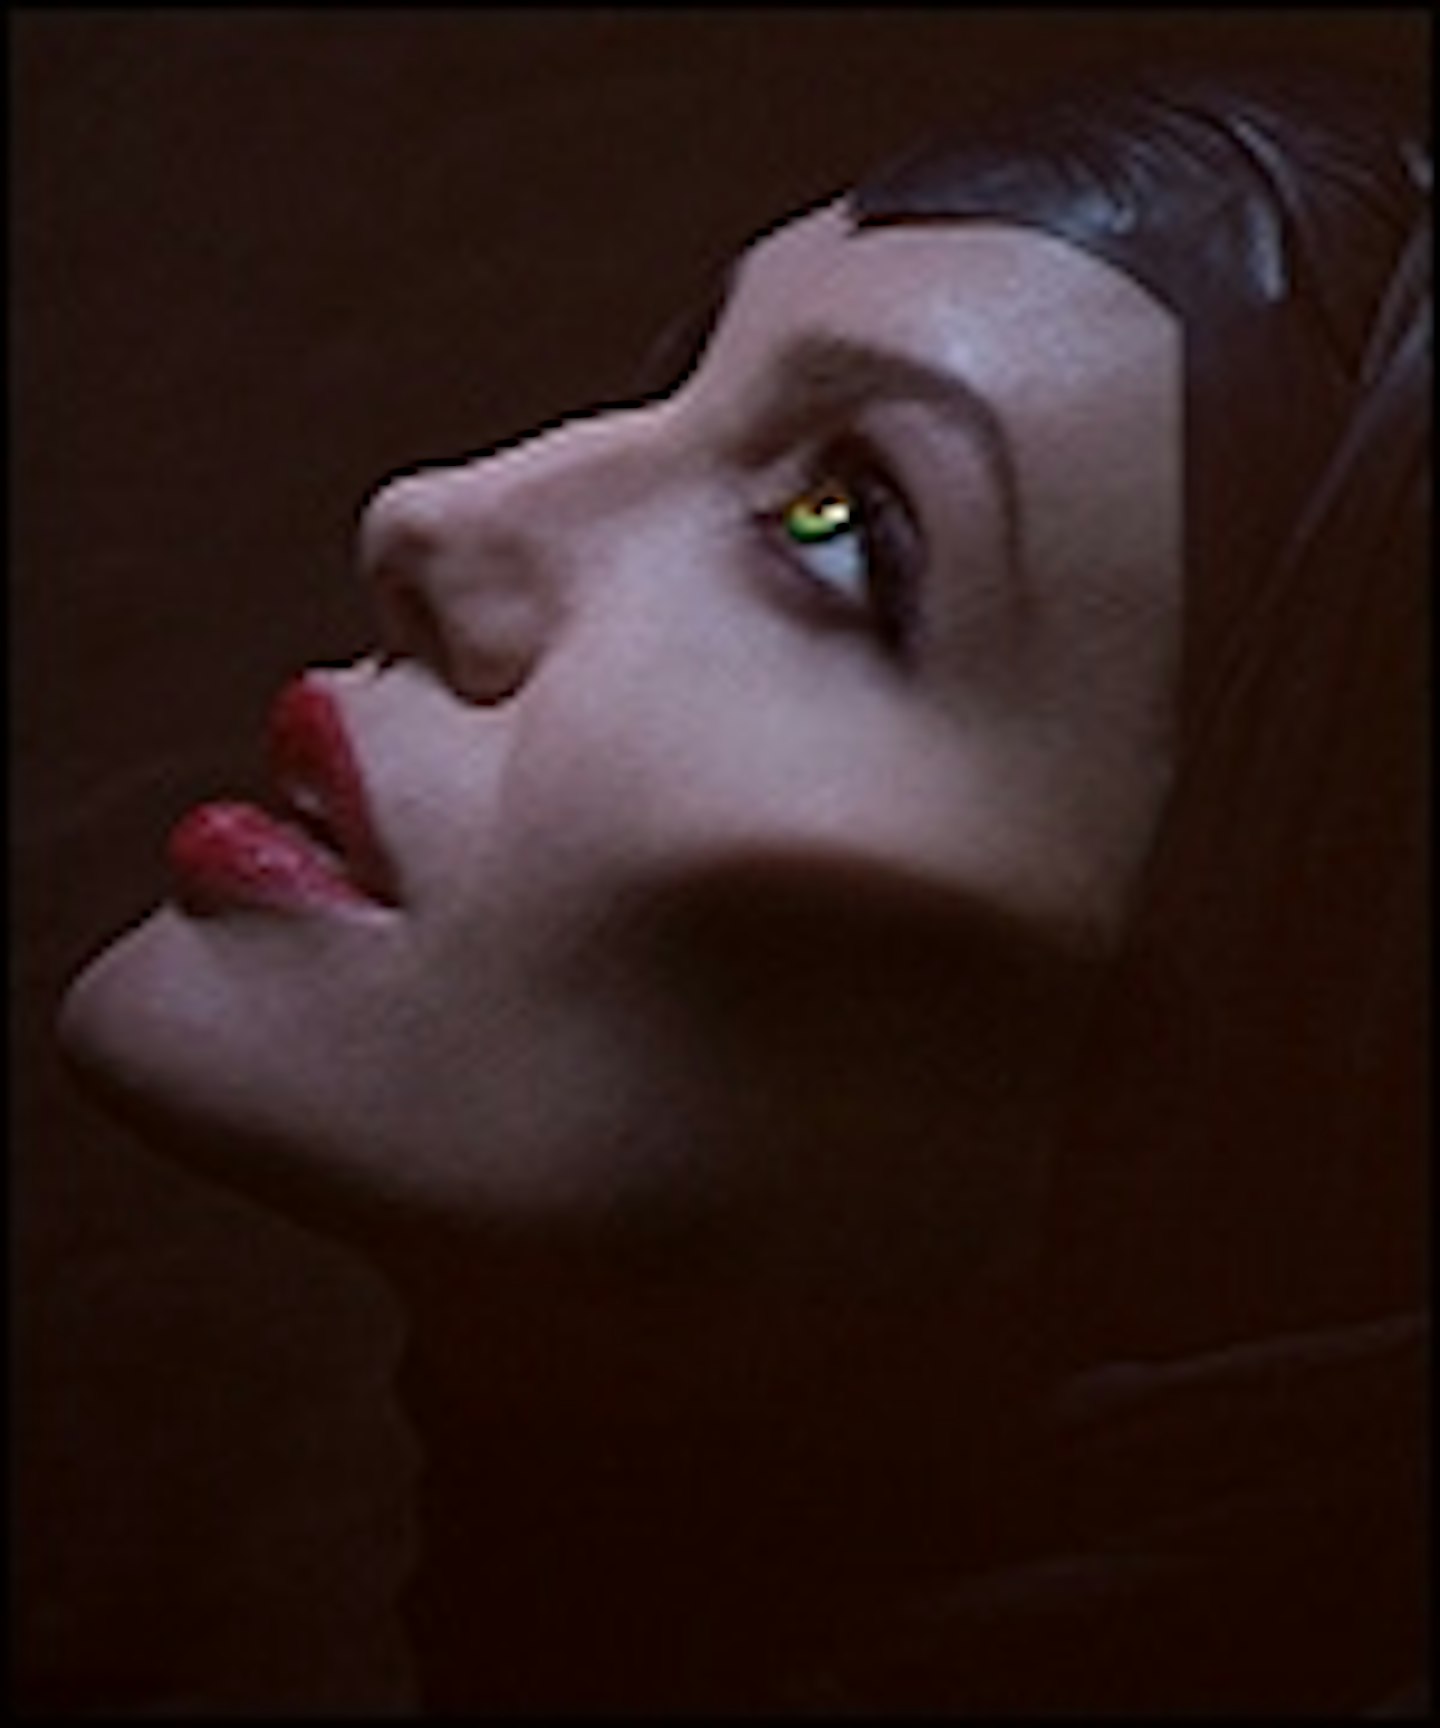 First Trailer For Maleficent Online